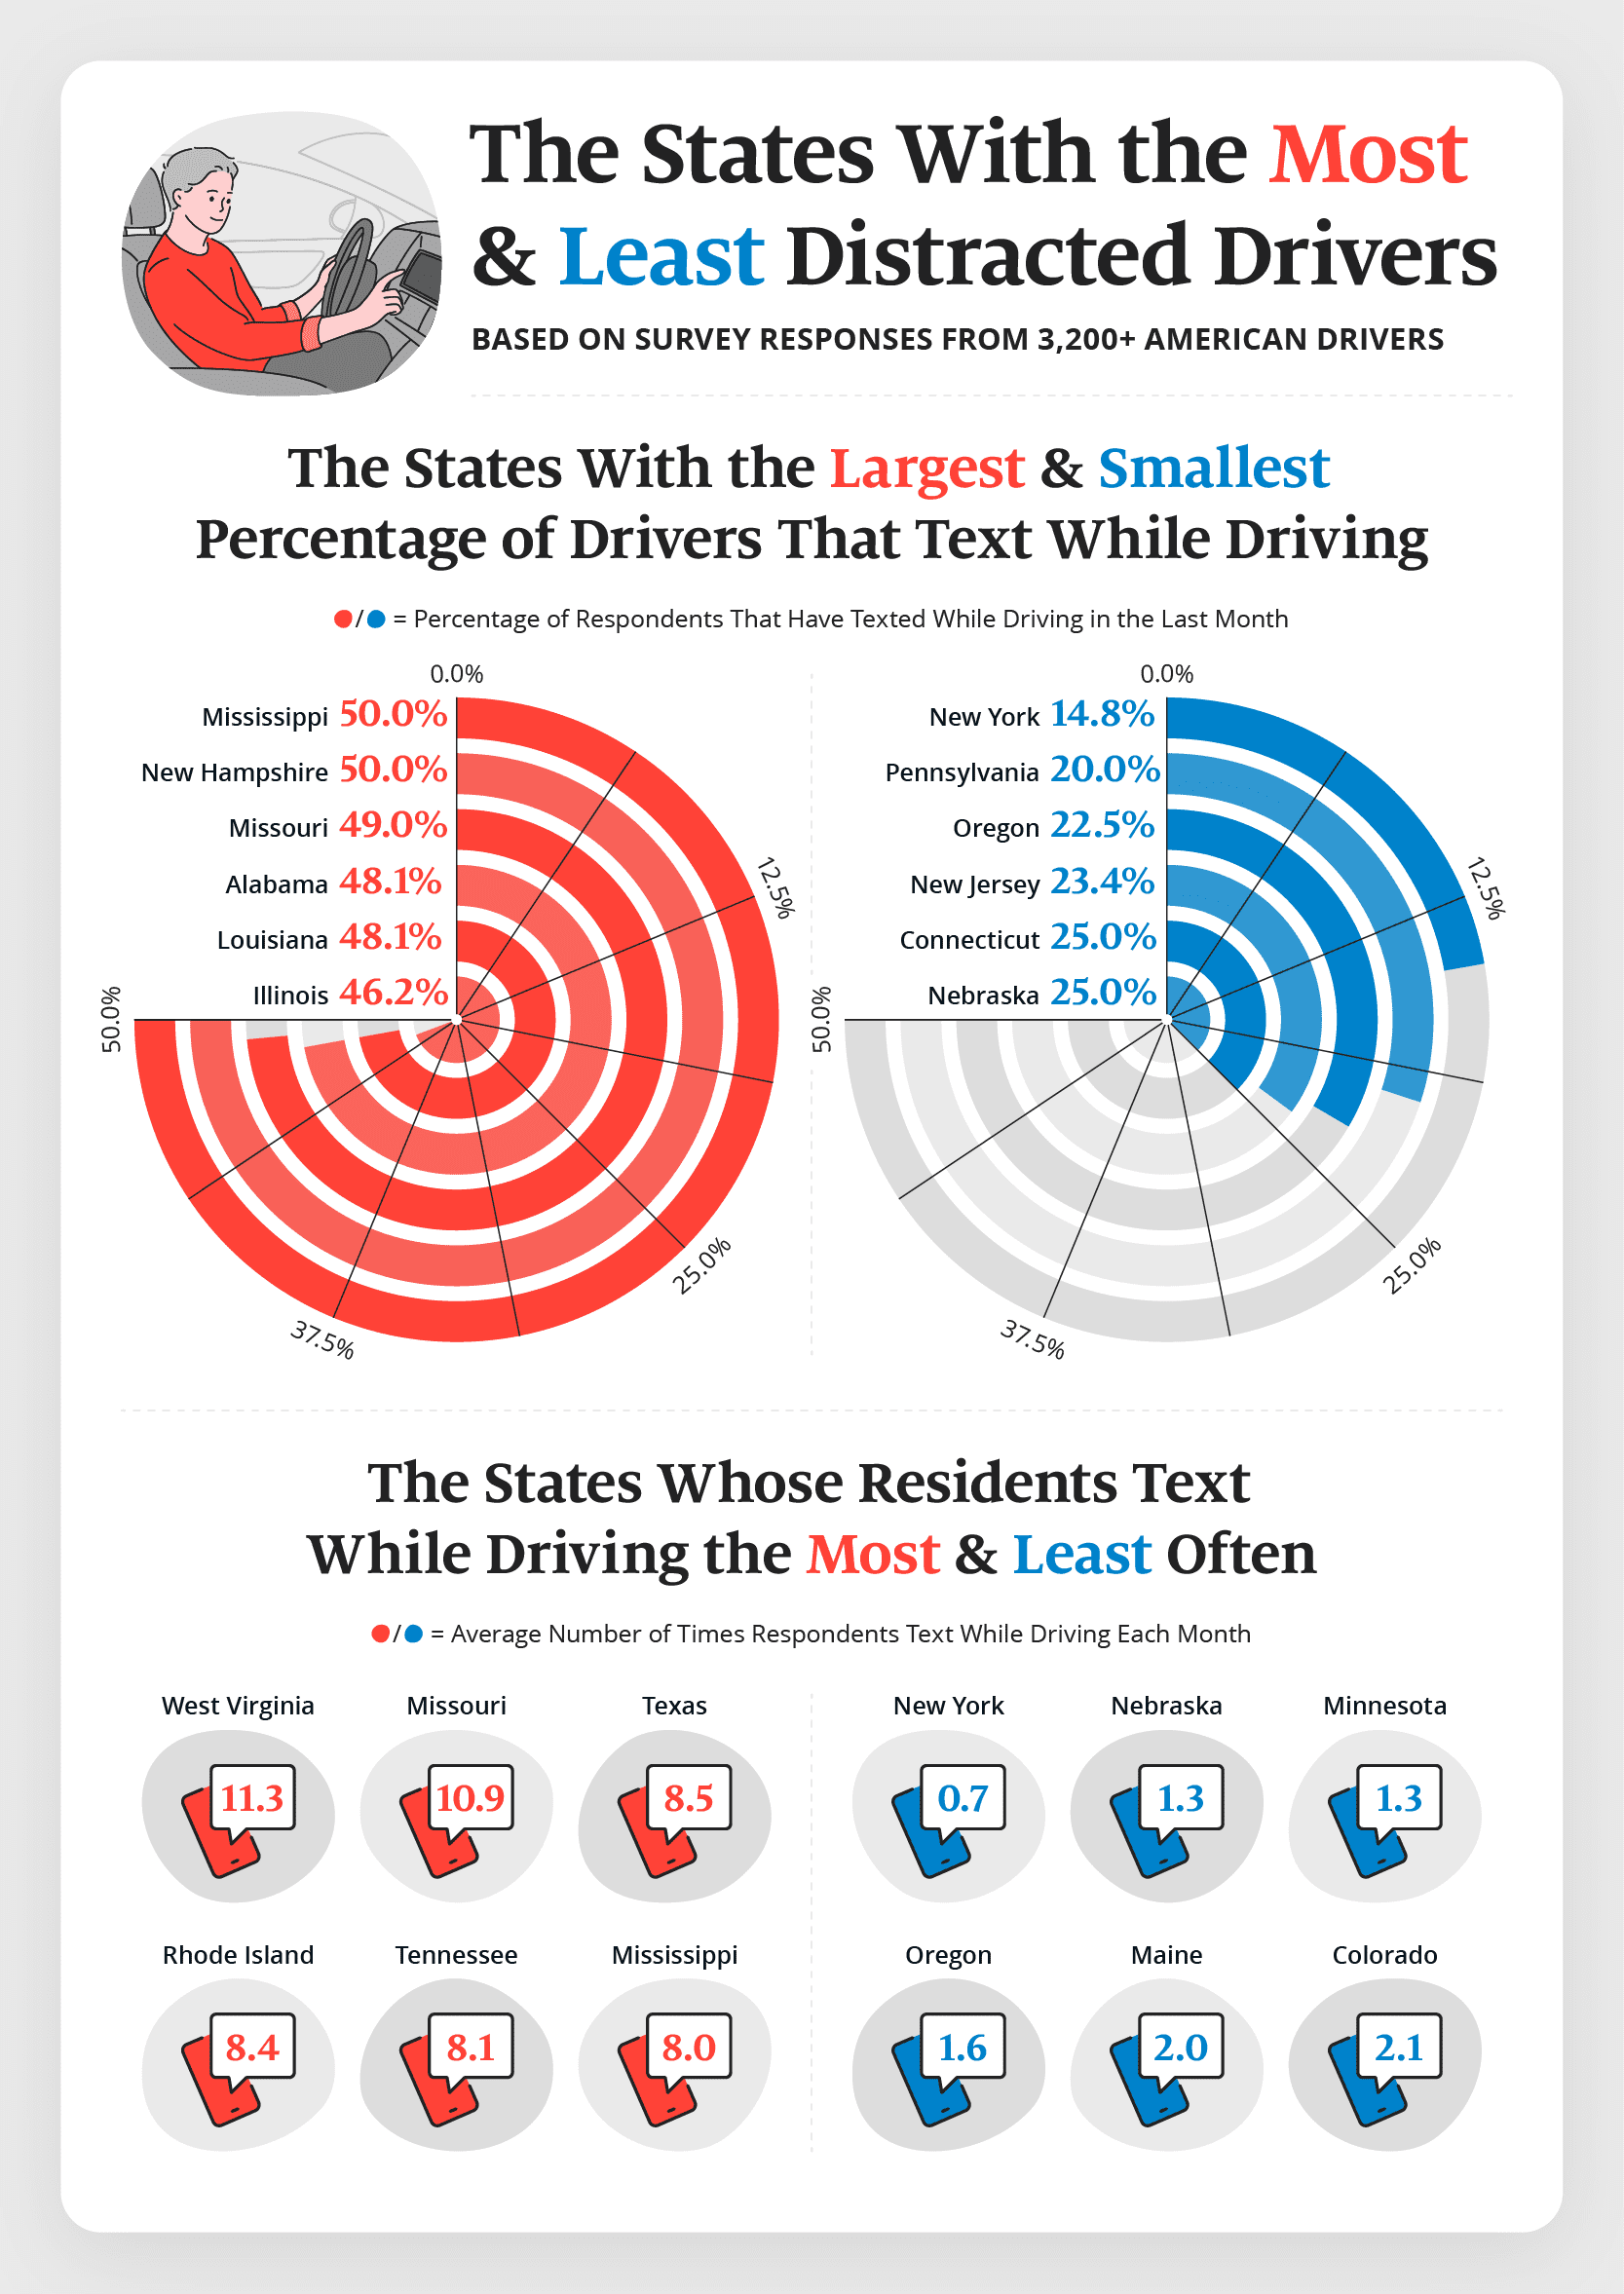 Charts showing which states text and drive the most and least.